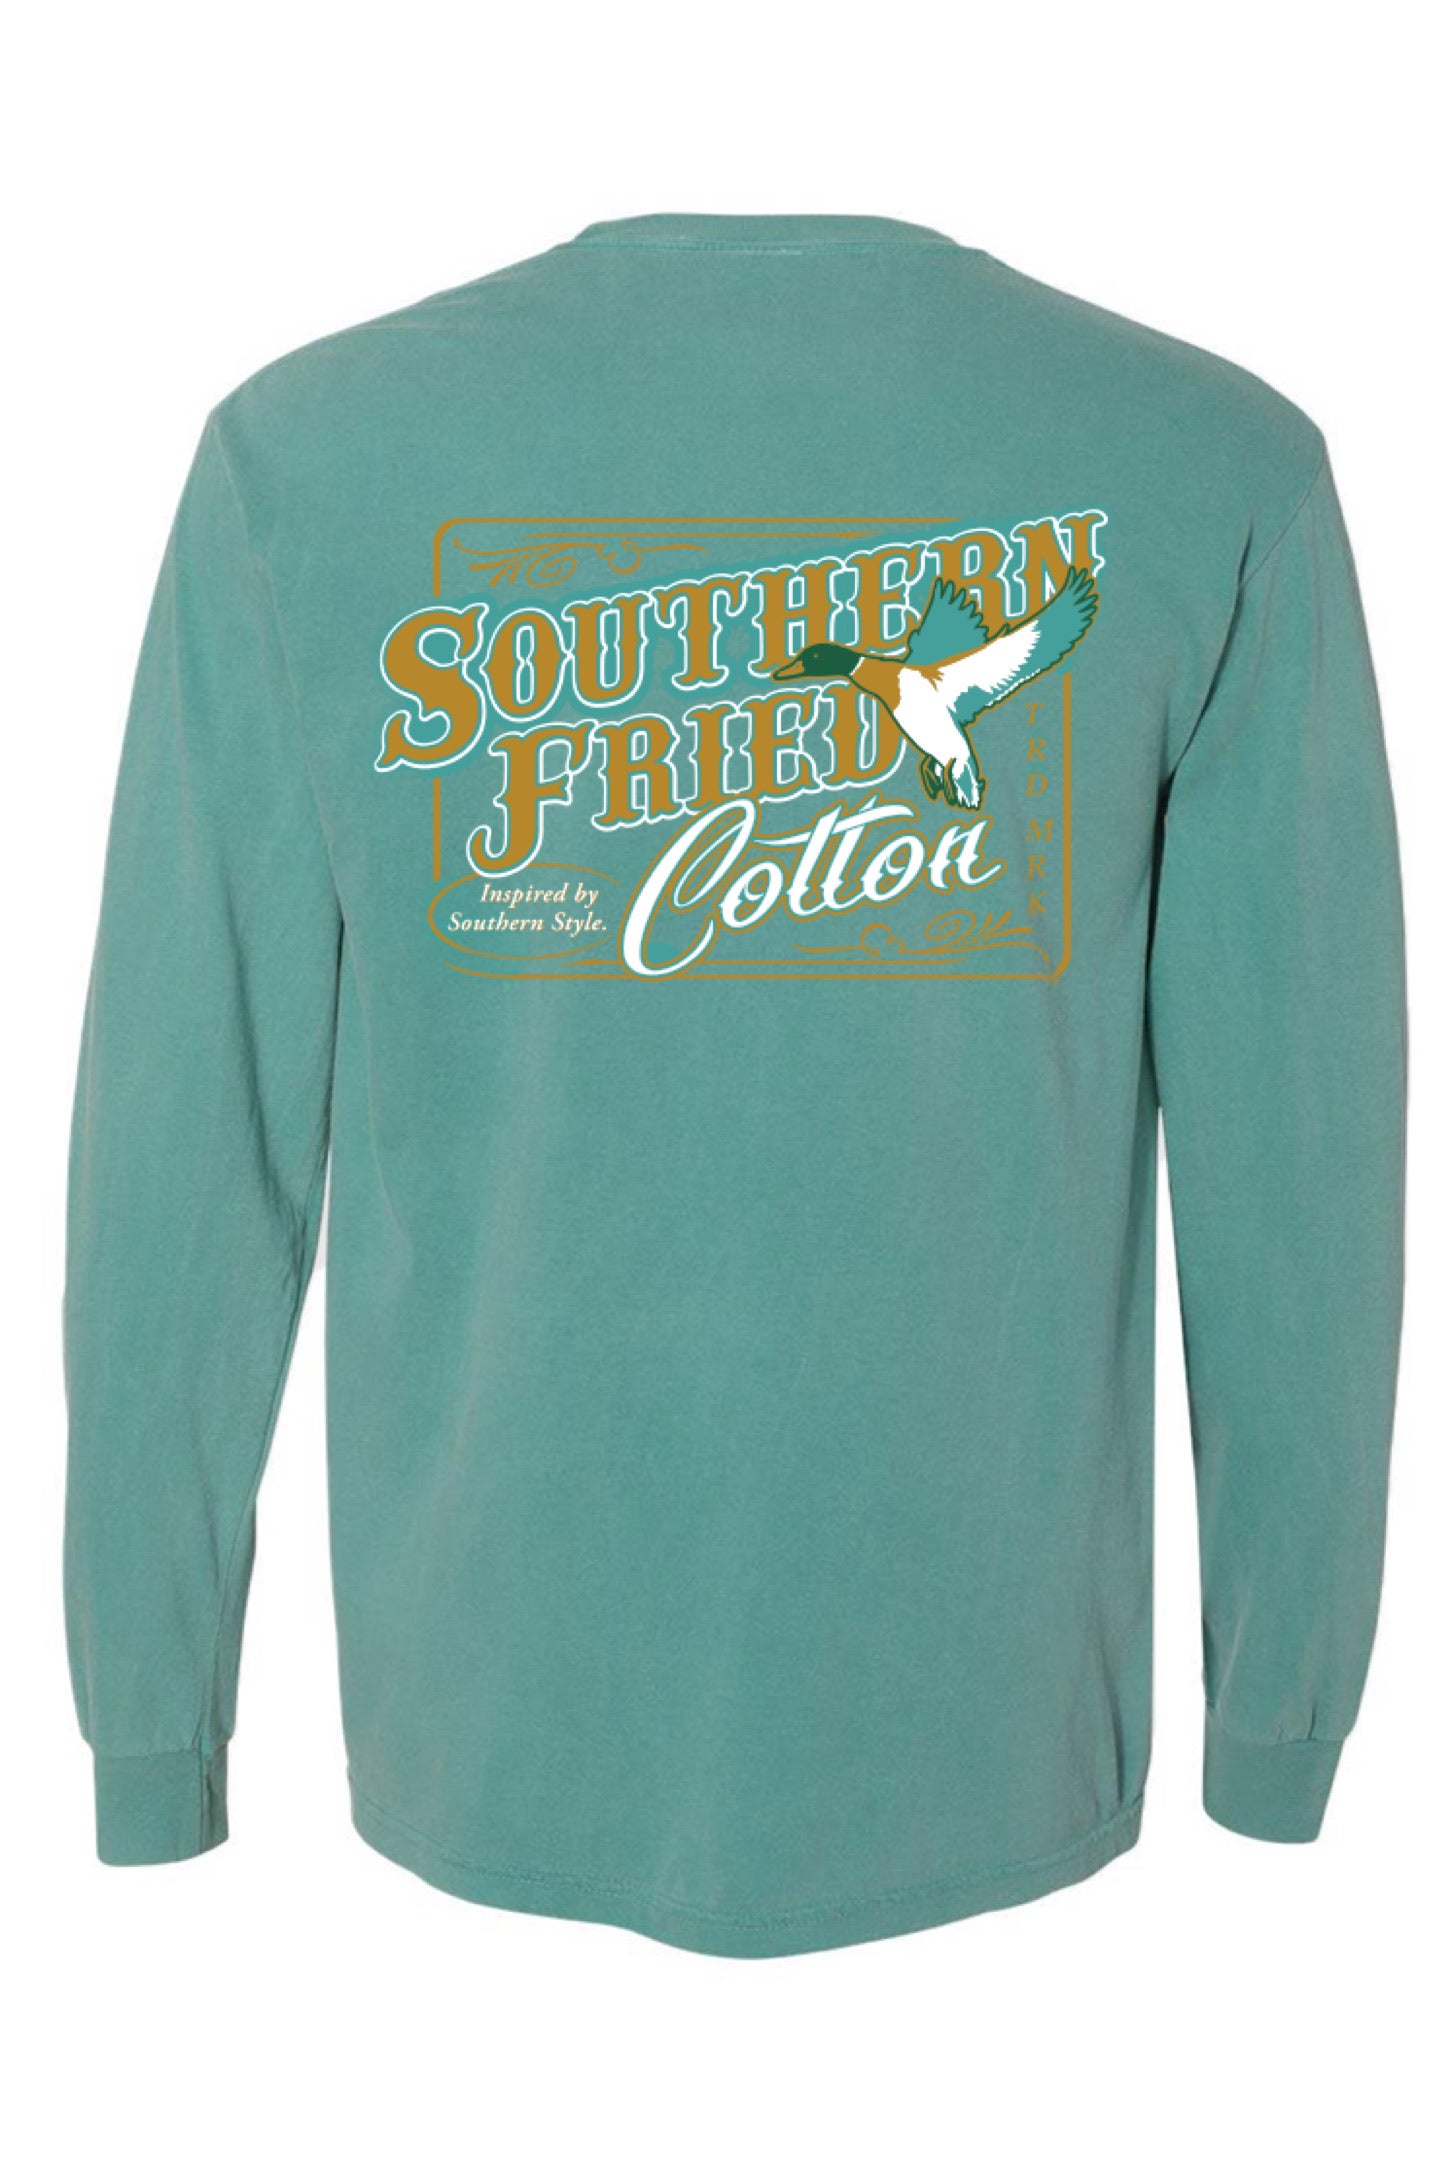 Flying Mallard Long Sleeves Tee by Southern Fried Cotton